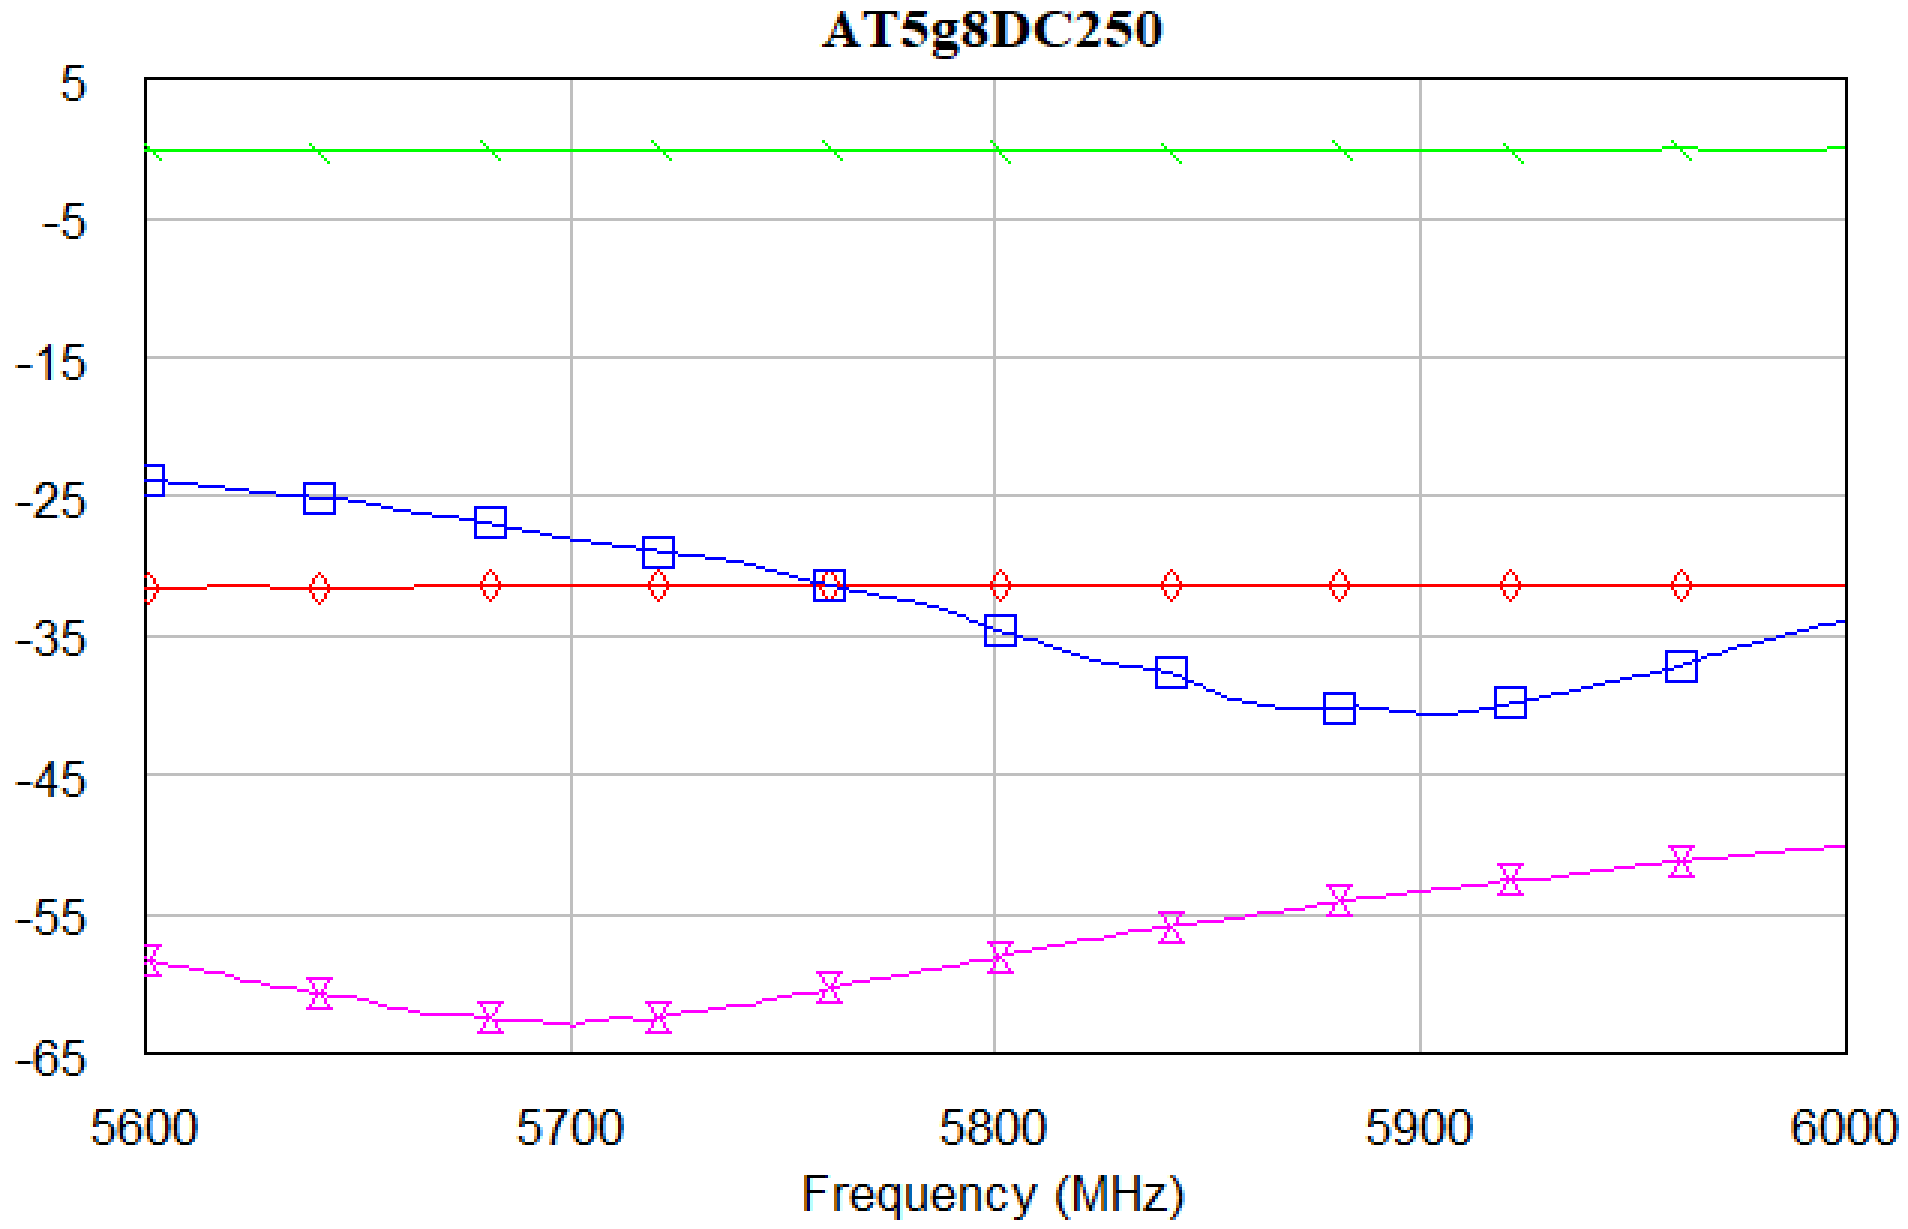 Performance of AT5g8DC250